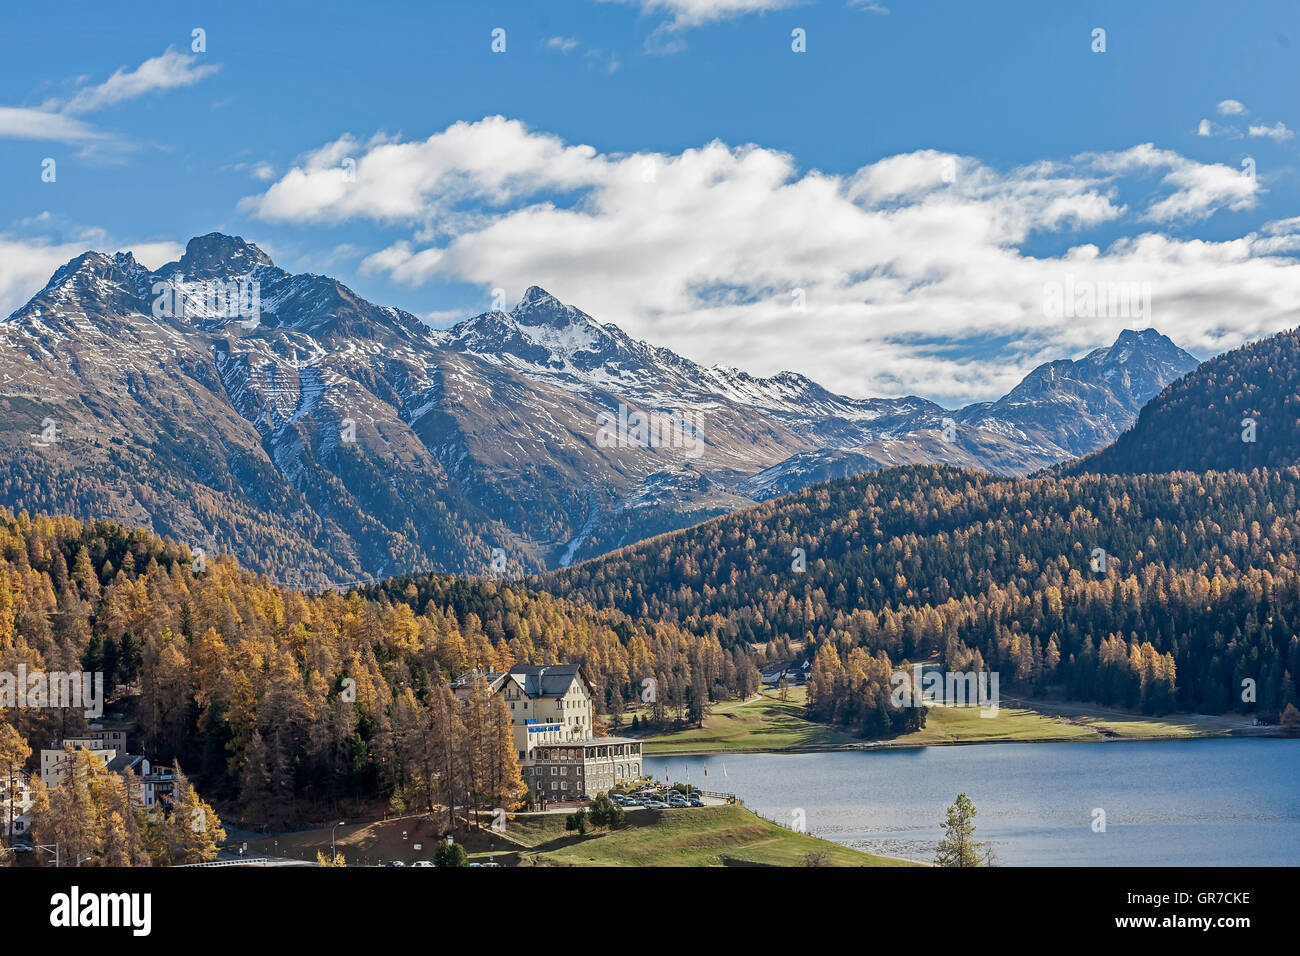 St. Moritz In The Upper Engadine Is The Smallest Of The Four Lakes In The Engadine Lakes. Stock Photo